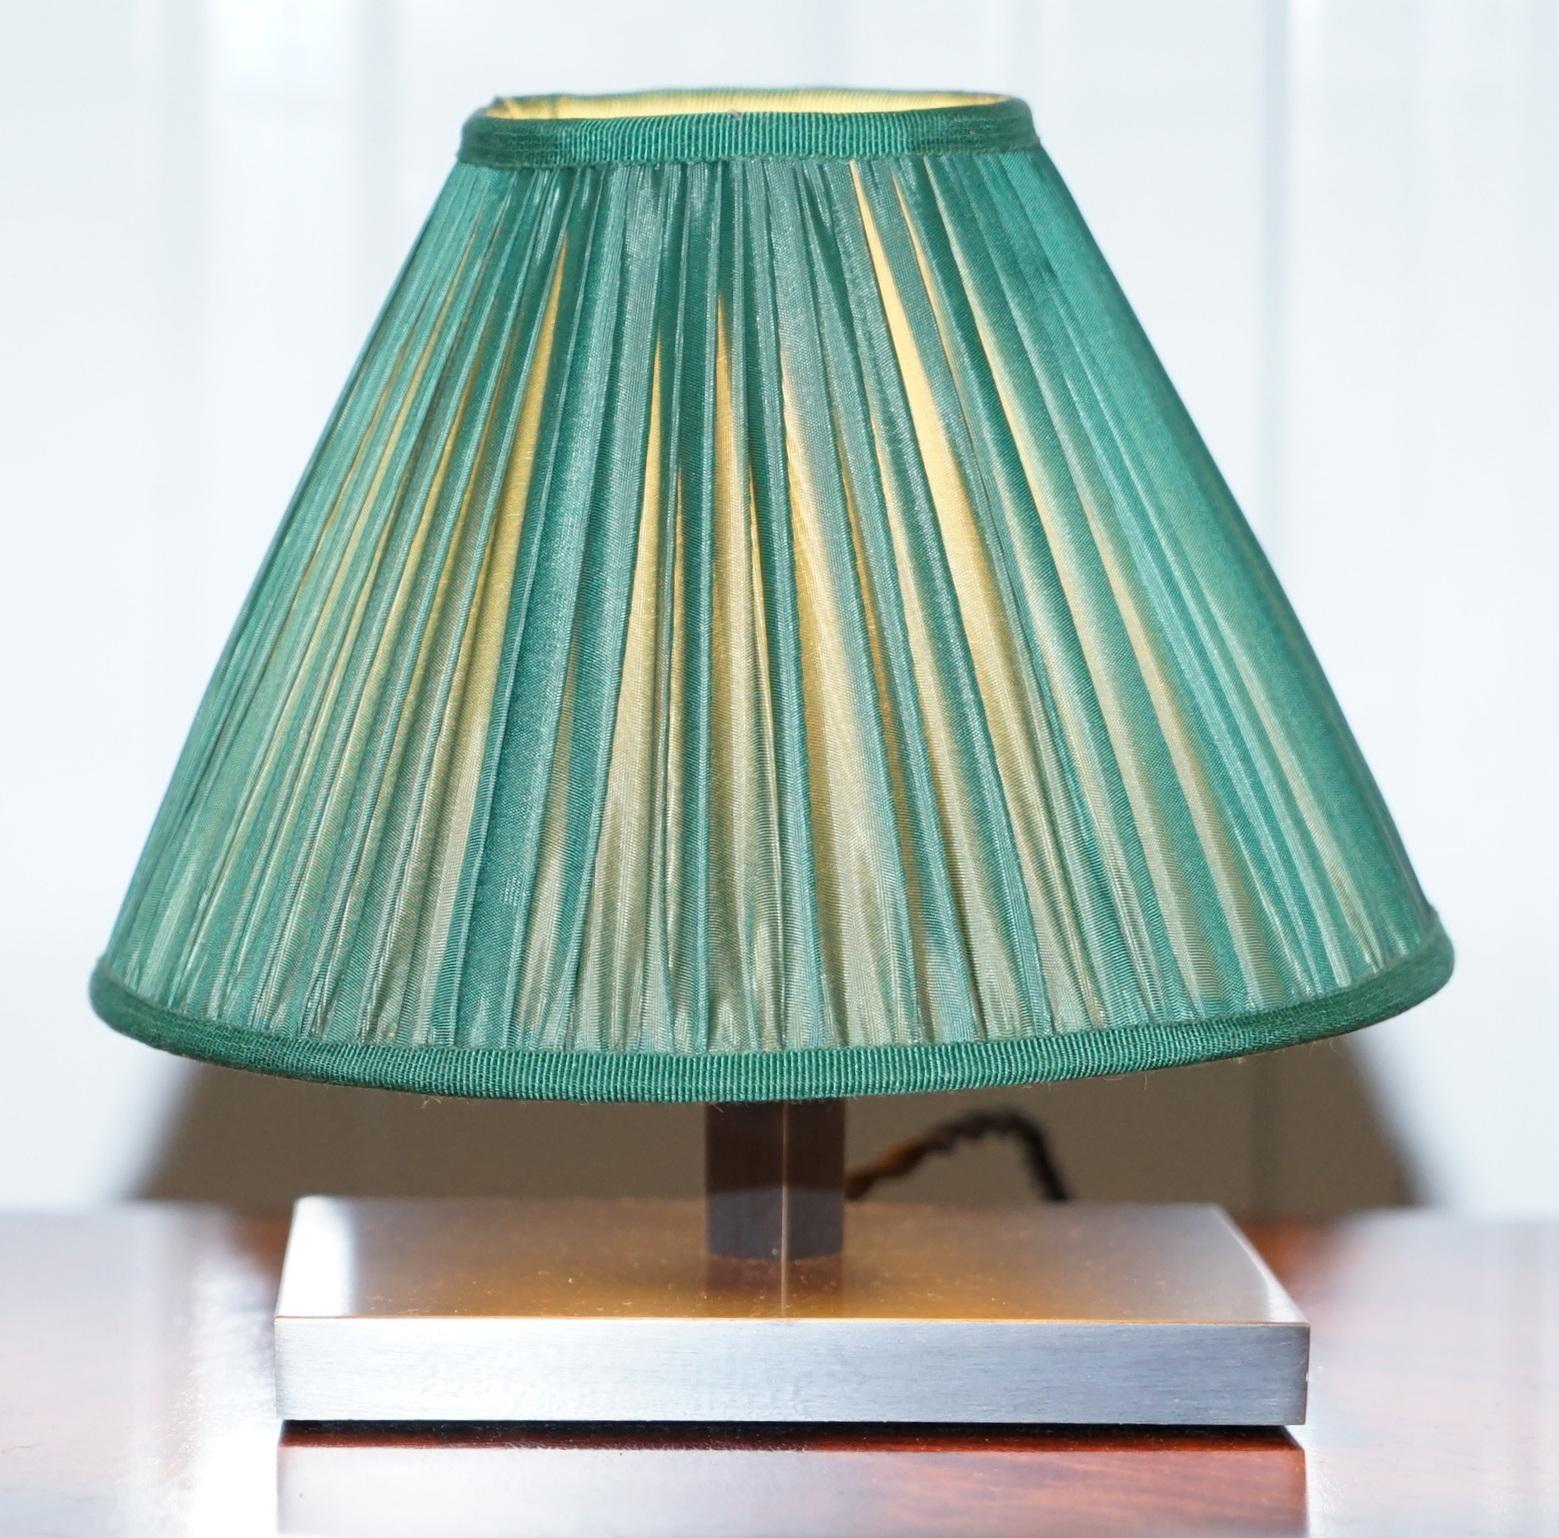 We are delighted to this lovely small table lamp with green shade

A good looking and functional little lamp, the shade filters the light nicely and it comes through the fabric

Dimensions

Height 18.5cm

Width 20cm

Depth 20cm

Please